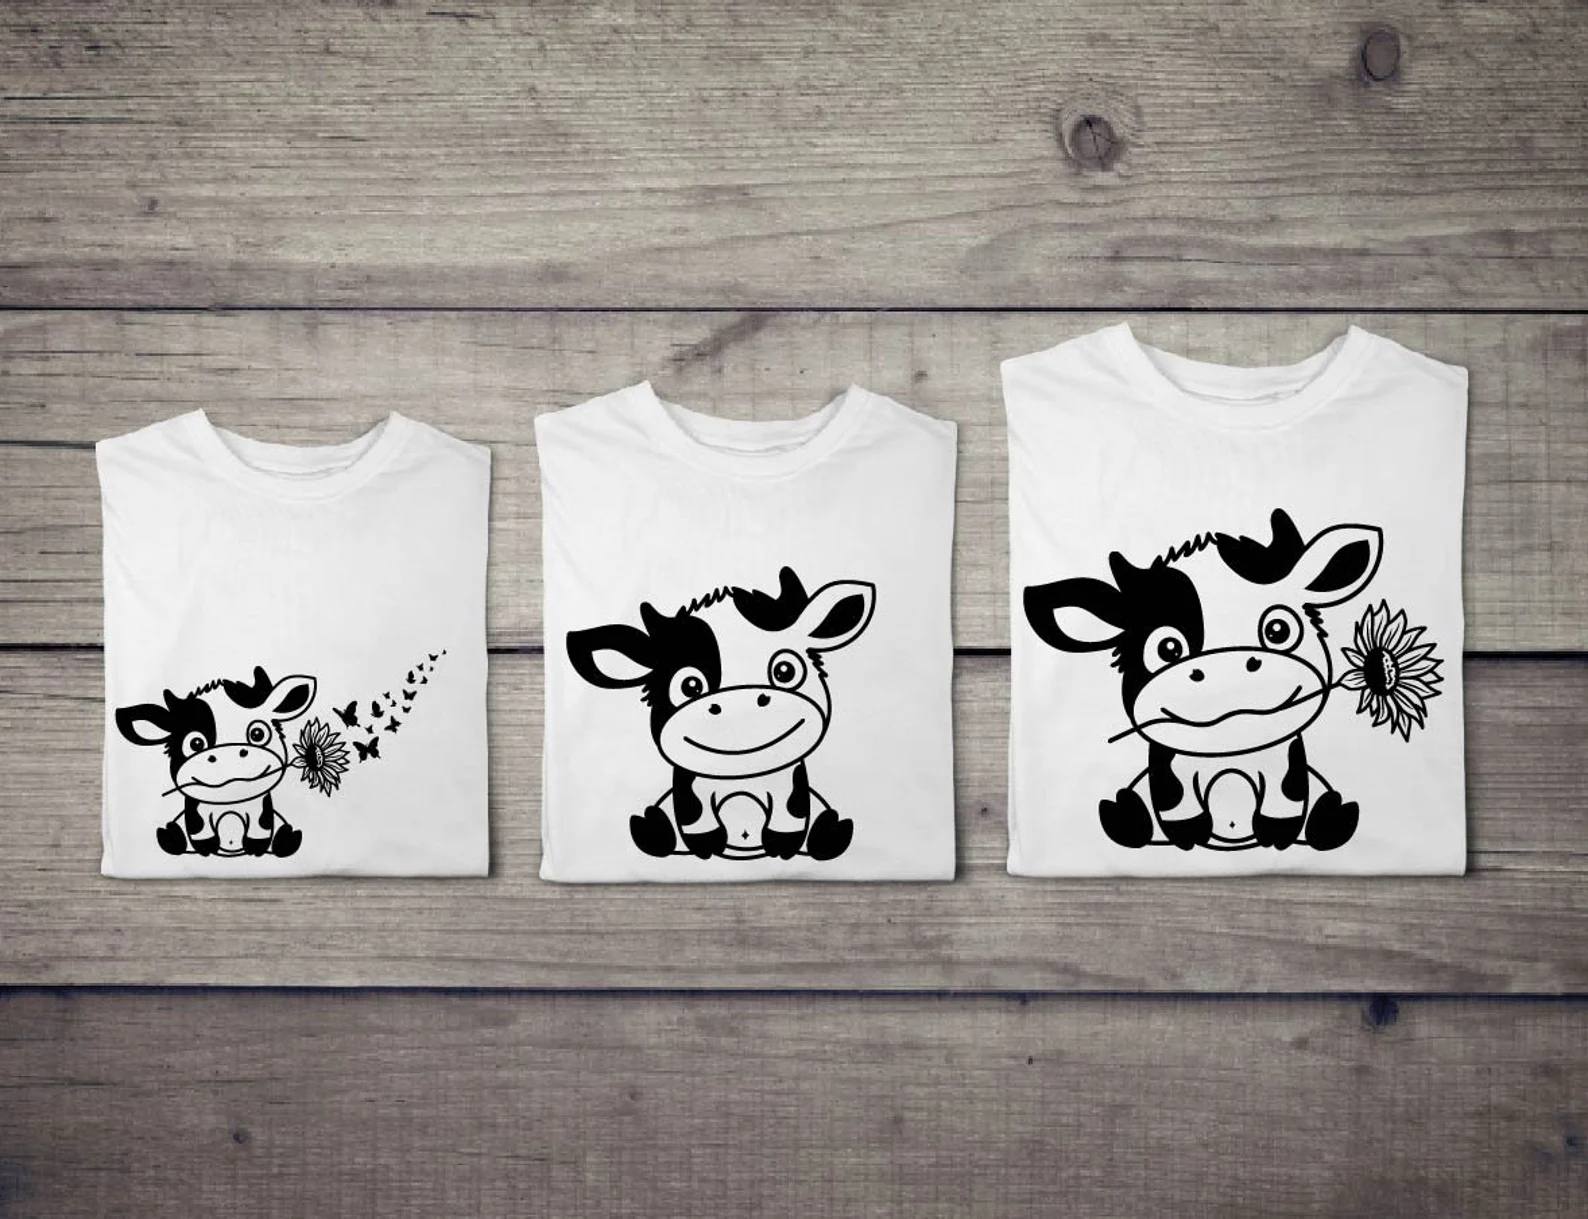 Three t - shirts with a cartoon cow on them.